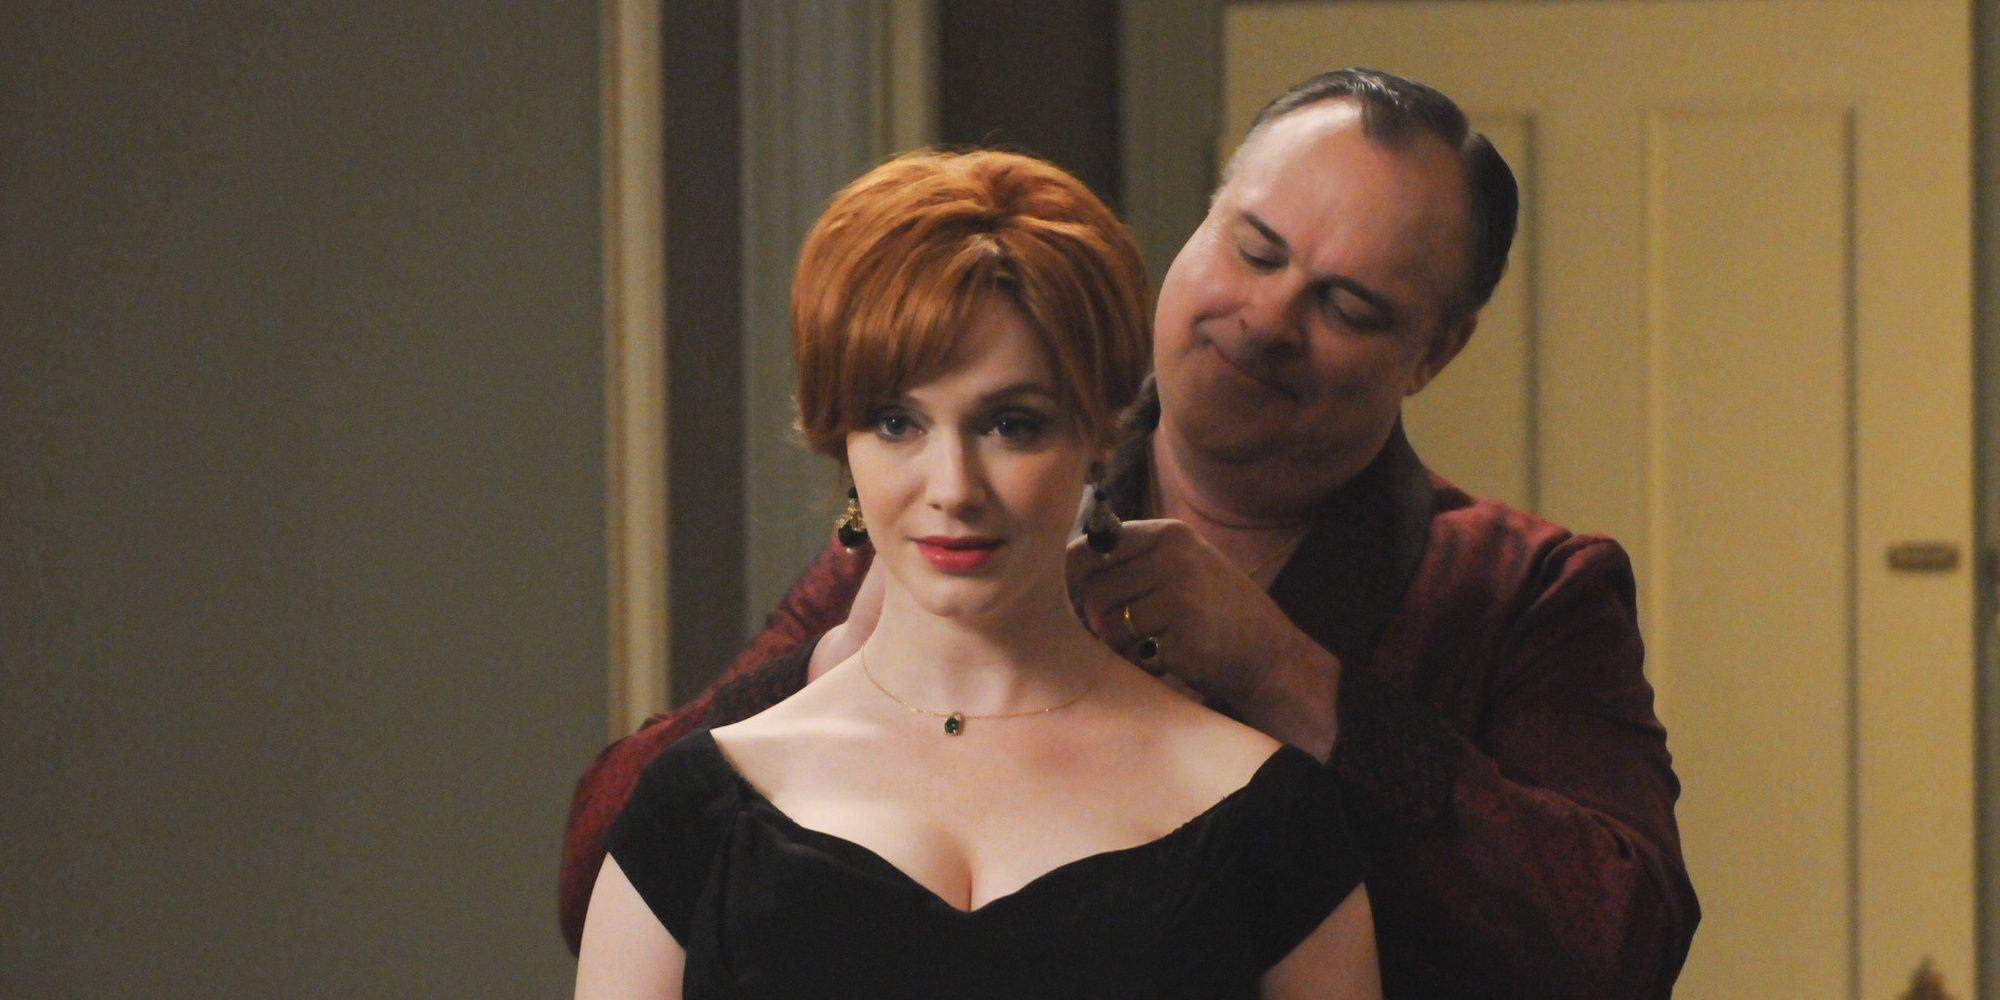 Mad Men The 10 Most Heartbreaking Episodes According To Reddit